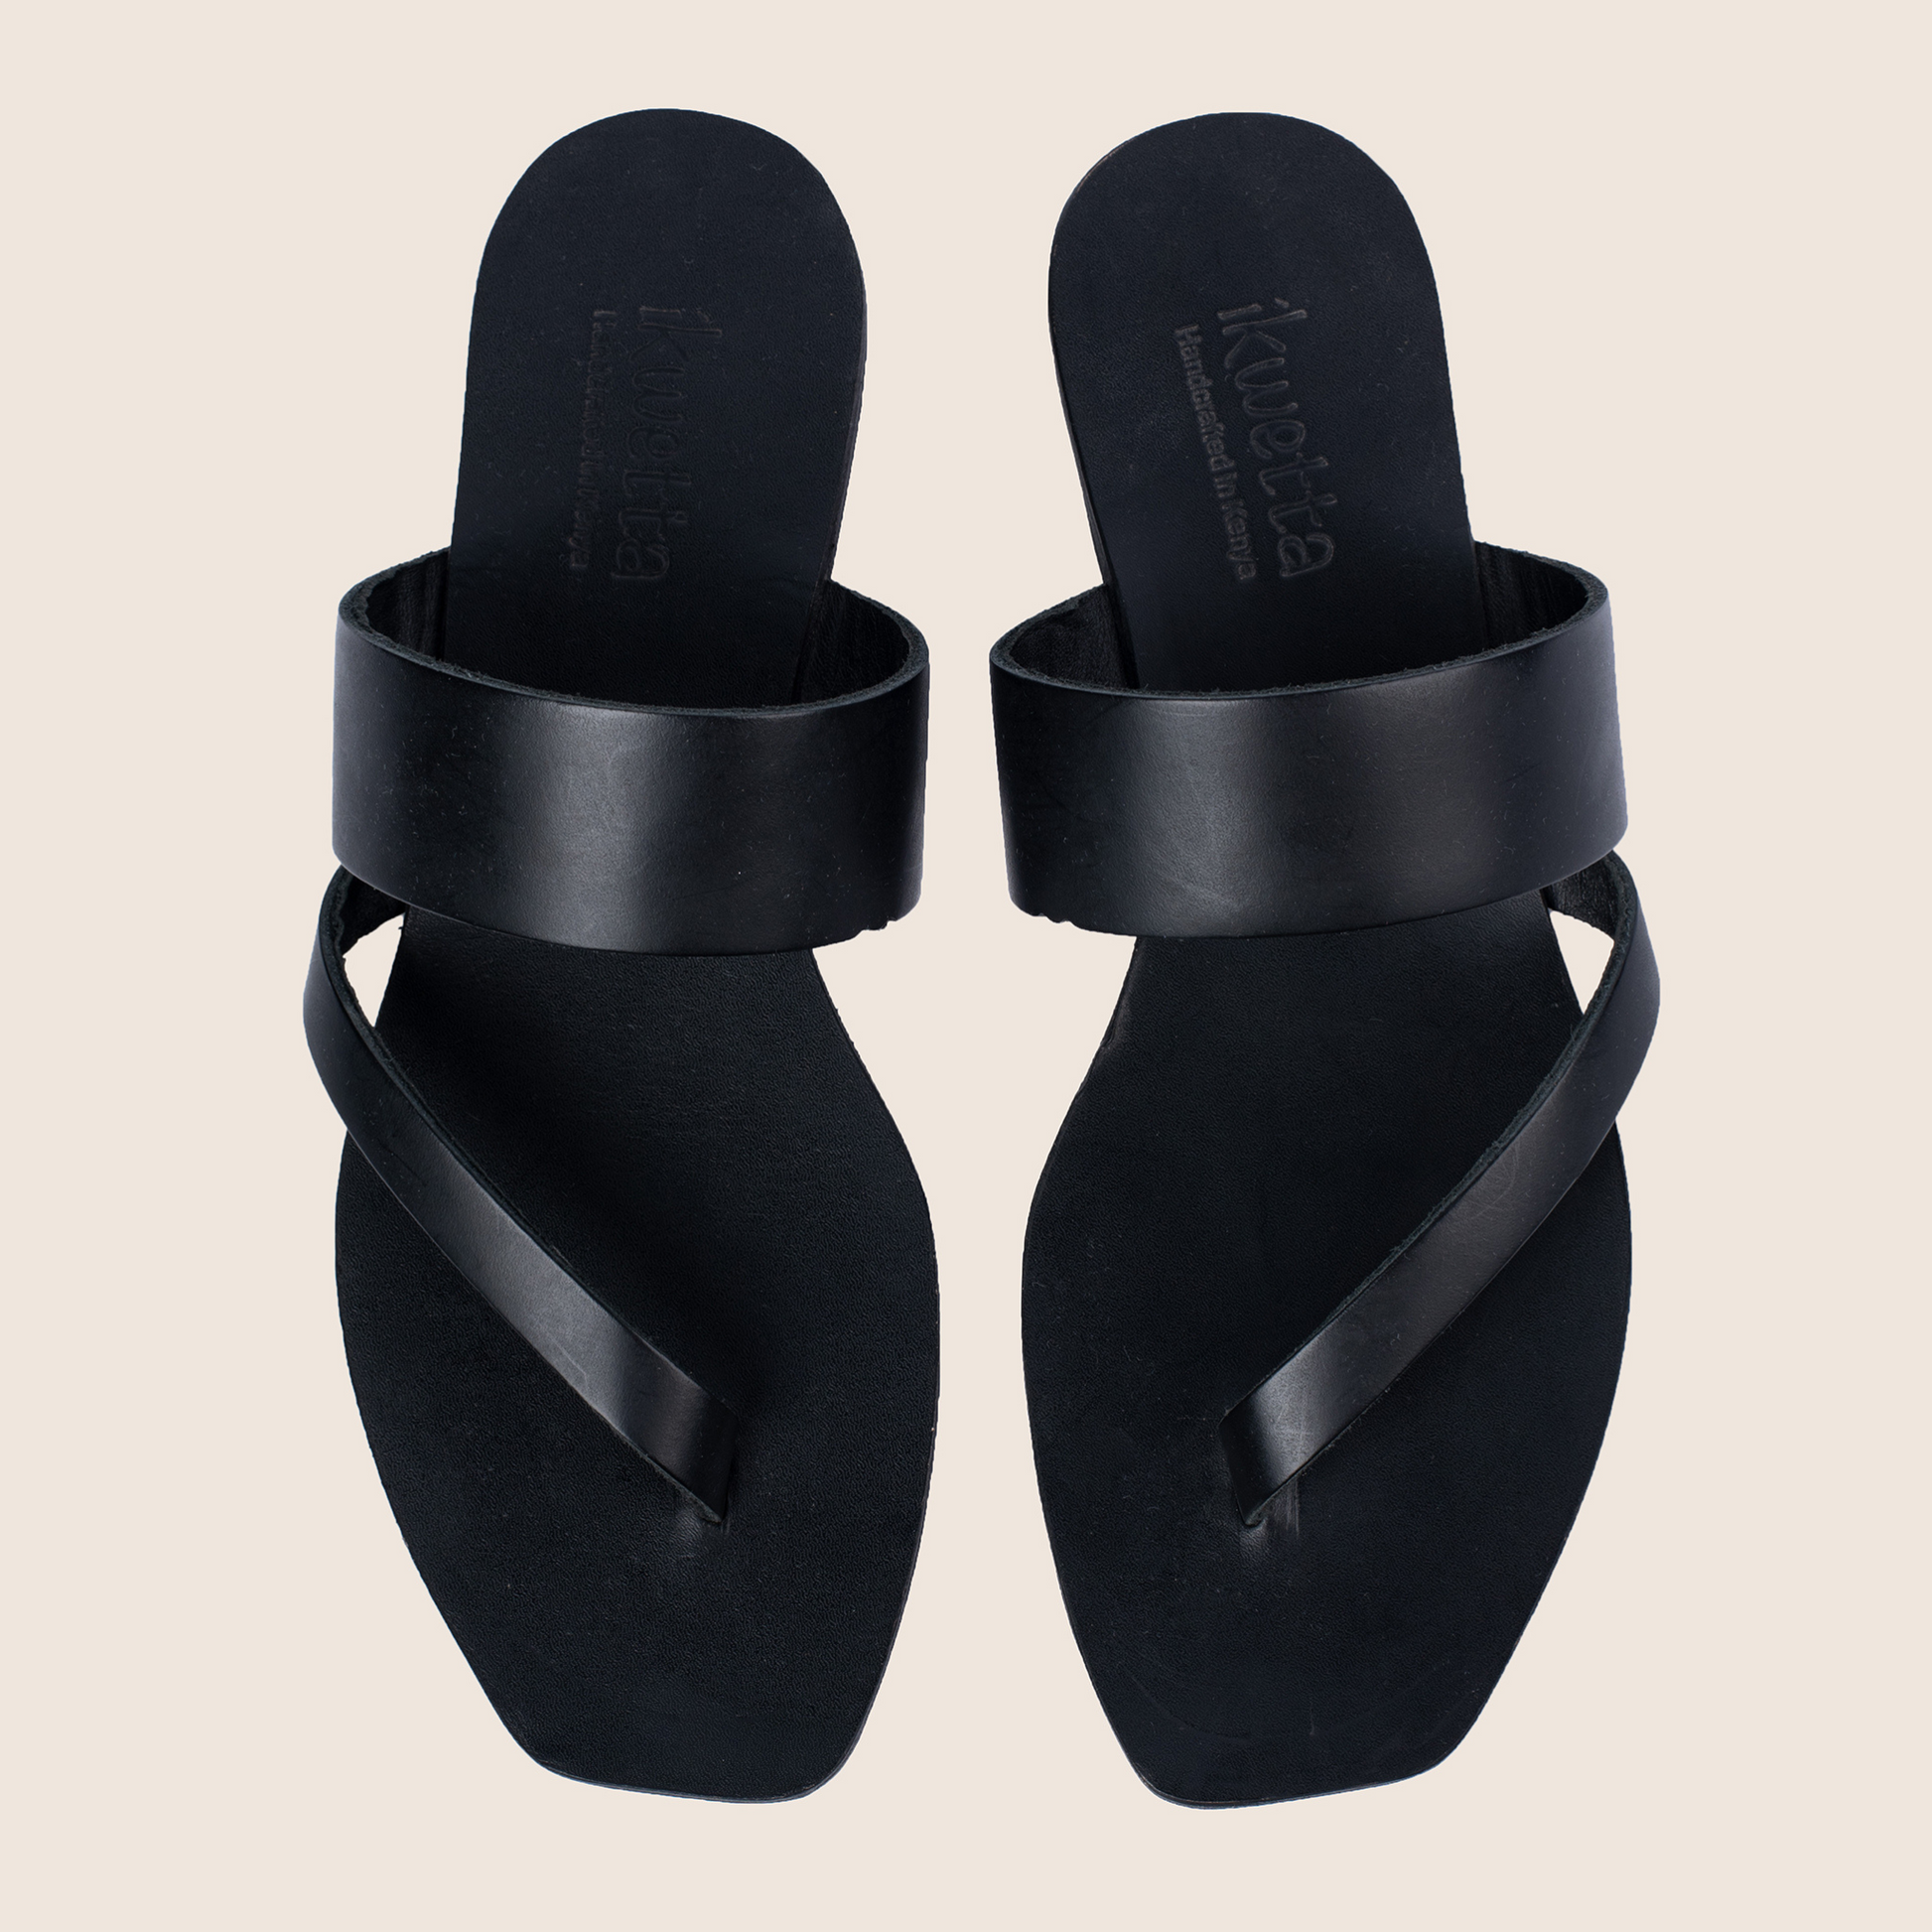 Tahiti sandals in black smooth leather and leather sole